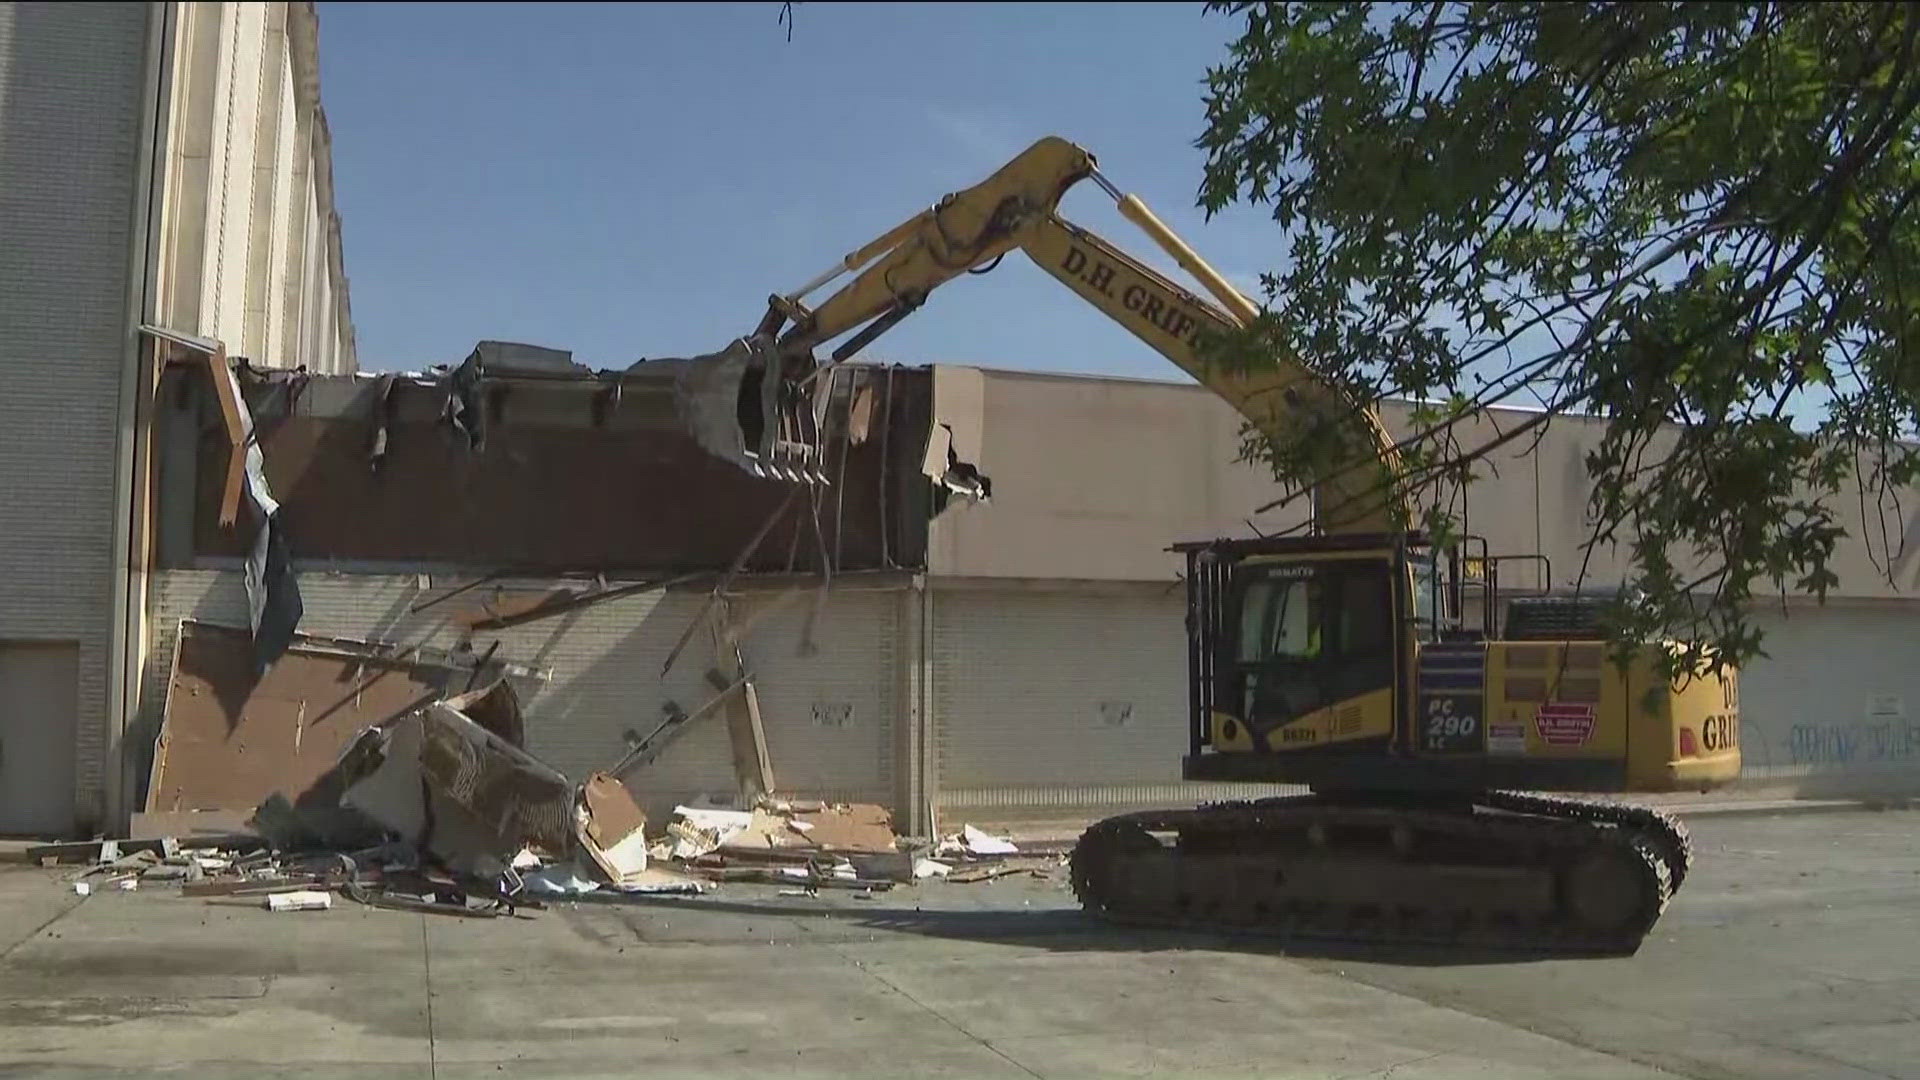 Demolition is underway at North DeKalb Mall as the new owners tear down and rebuild. Here's the latest on the transformation project.